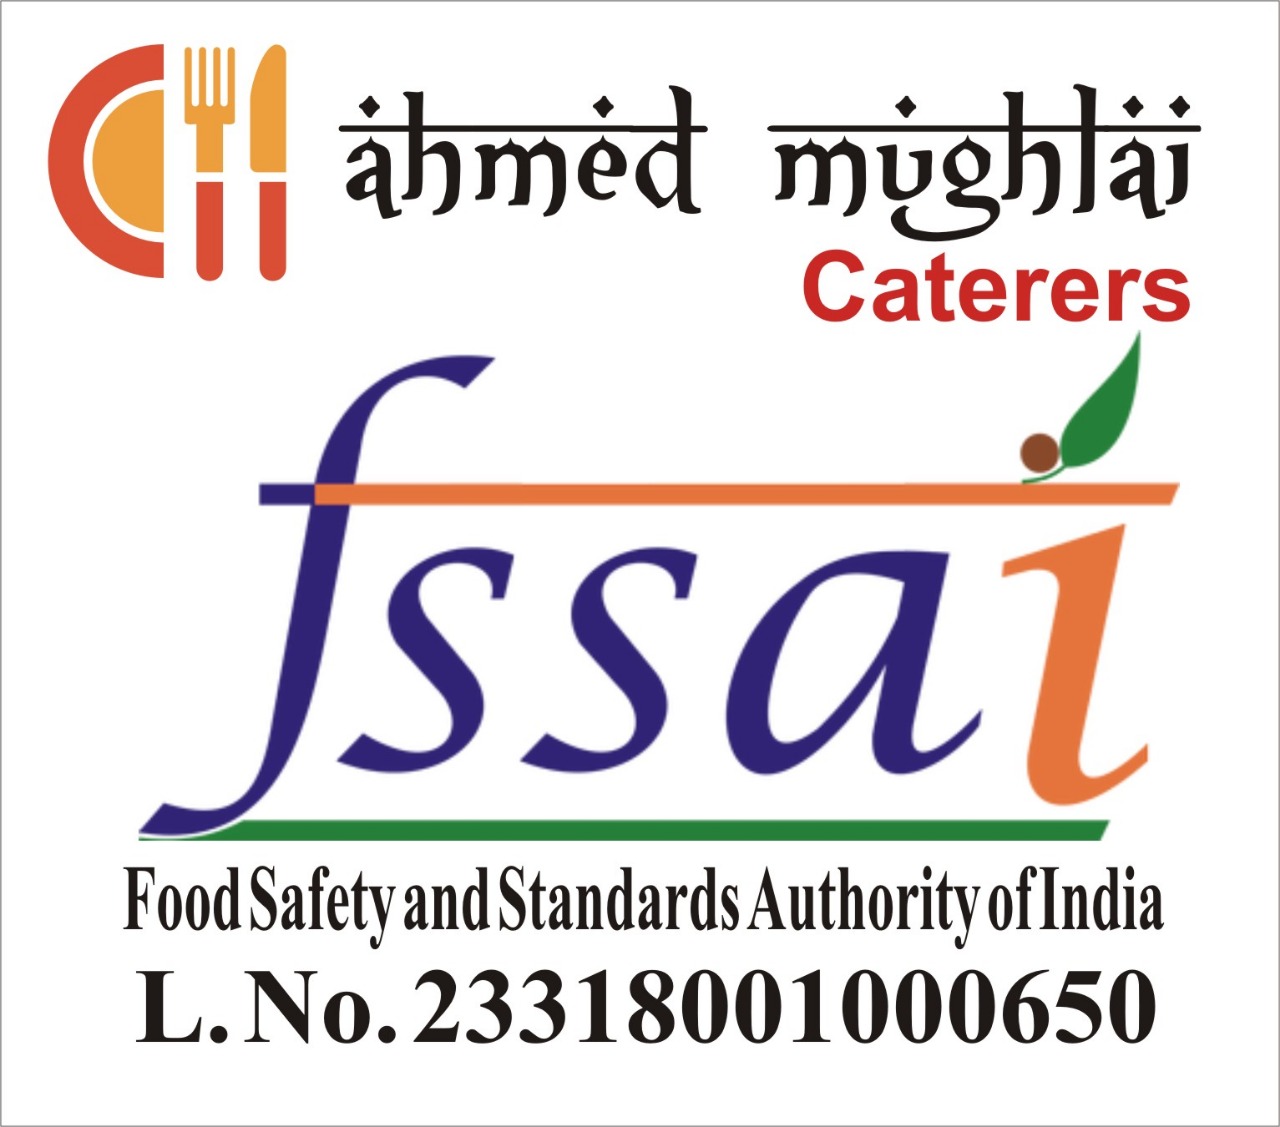 Ahmed Mughlai caterers | Certified food safety and standards authority of India